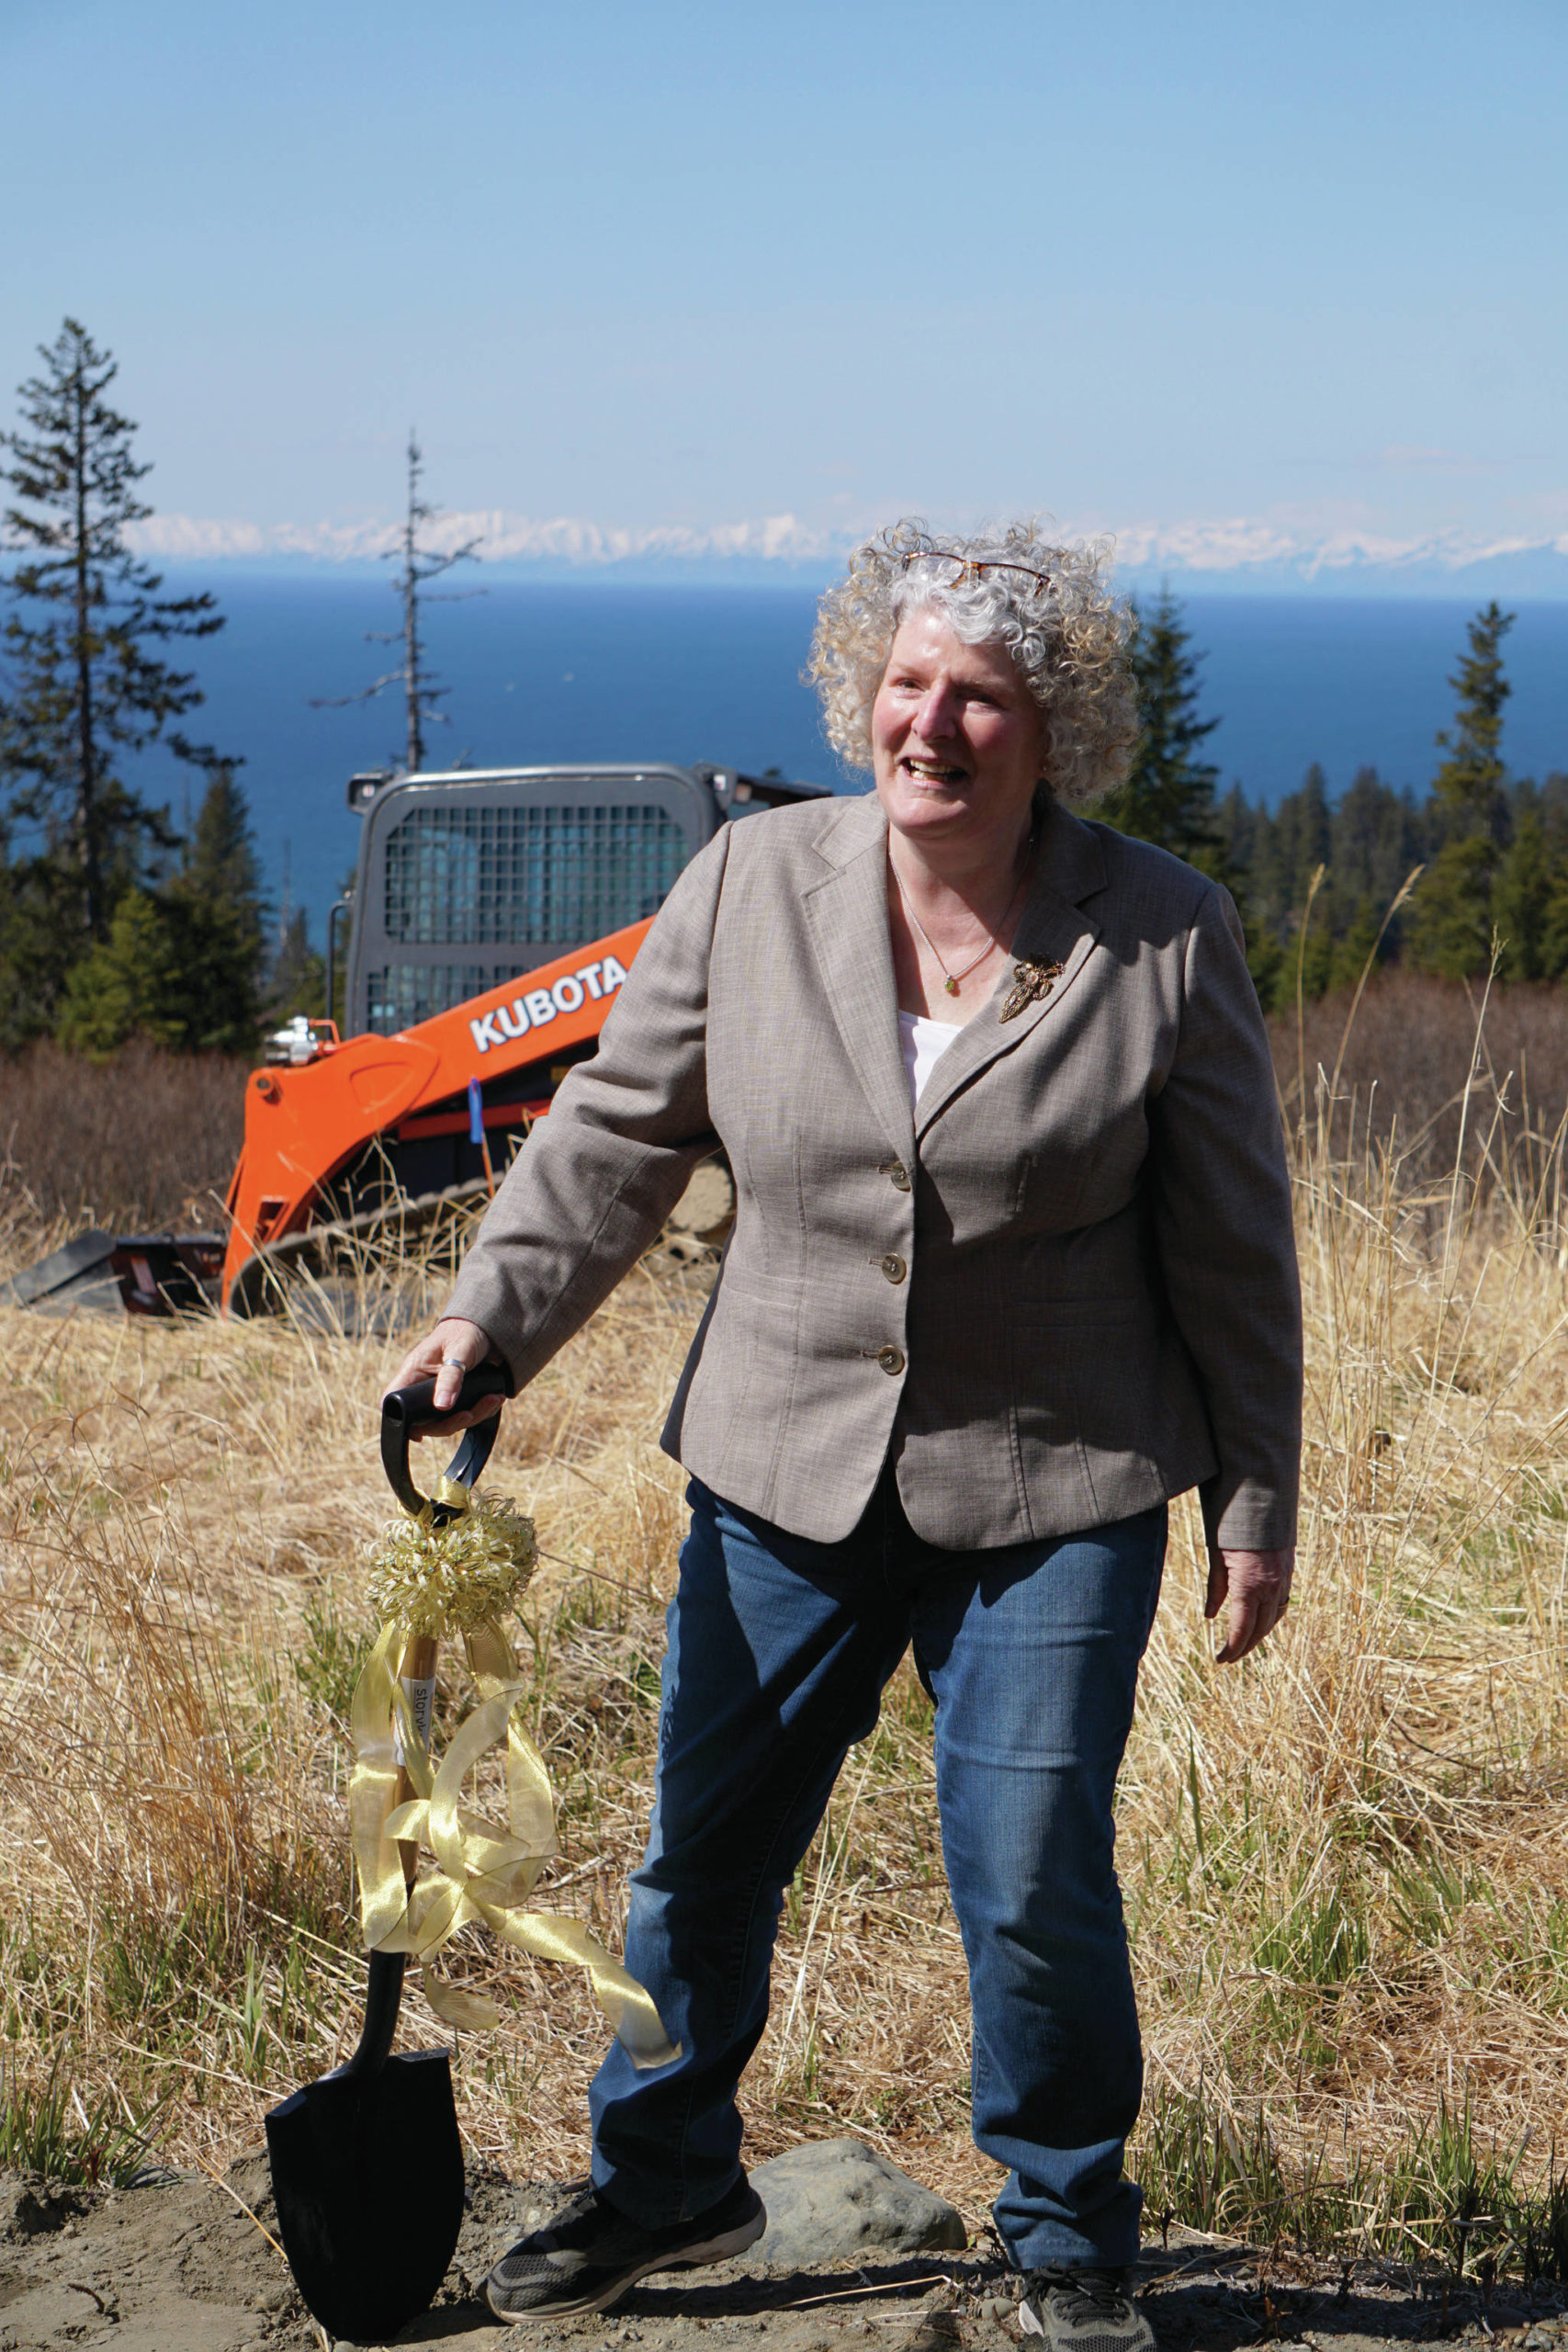 Homer writer and Storyknife Writers Retreat founder Dana Stabenow stands near the site of the retreat at groundbreaking ceremonies on May 4, 2019, at the property in Homer, Alaska. Stabenow will receive the Susan Gibson Community Achievement Award for her work in founding Storyknife, a retreat for women writers. Construction started last year on the main house and cabins that will house visiting women writers. (Photo by Michael Armstrong/Homer News)